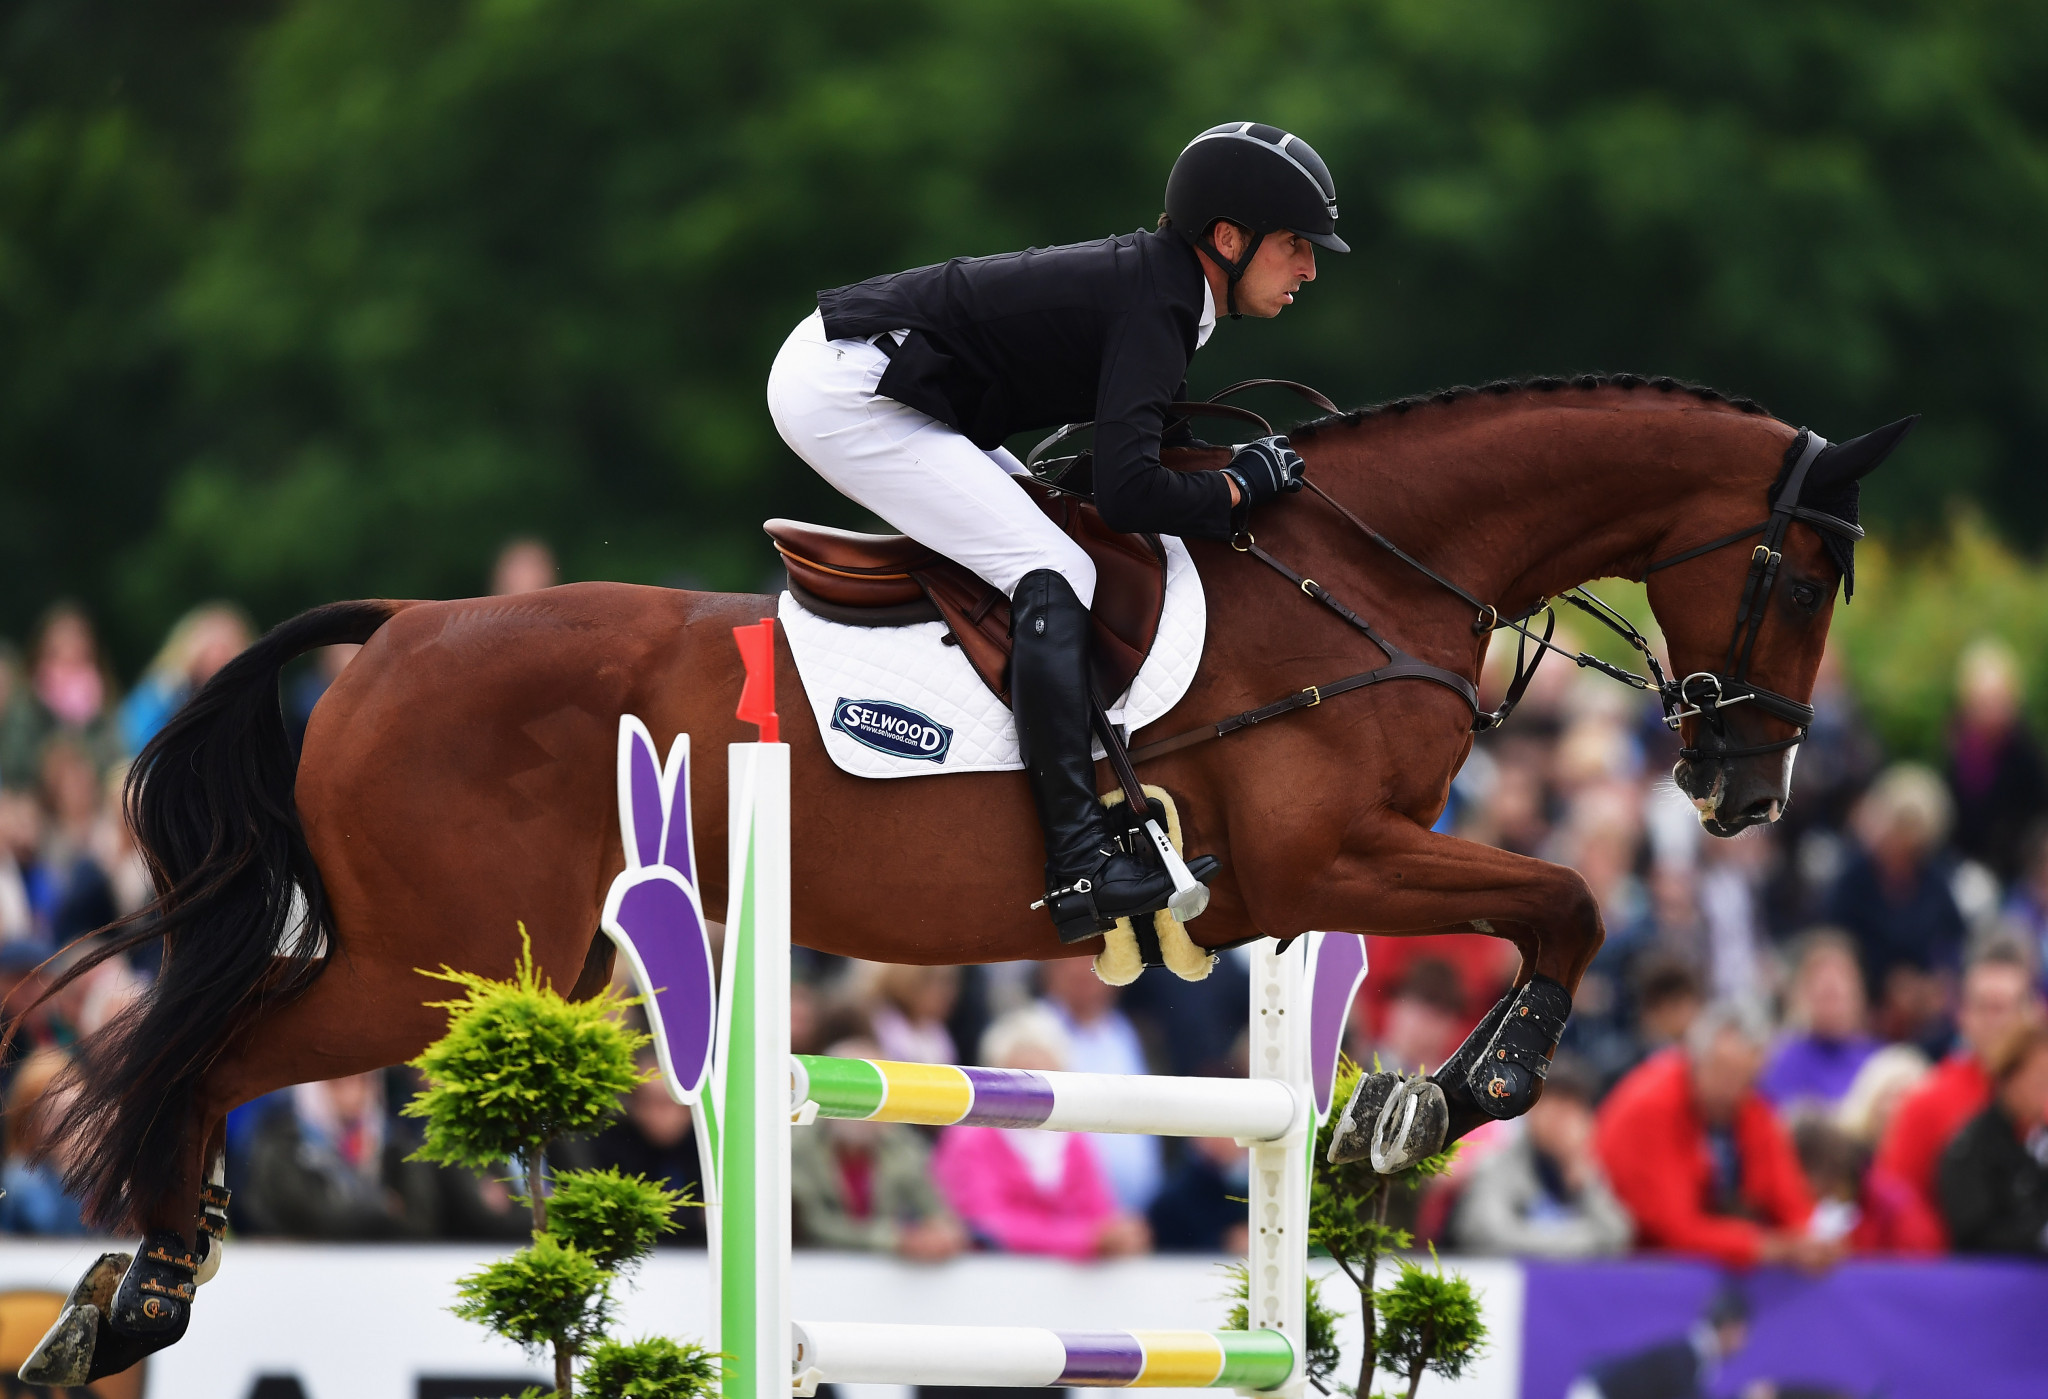 Price leads heading into final day of Burghley Horse Trials